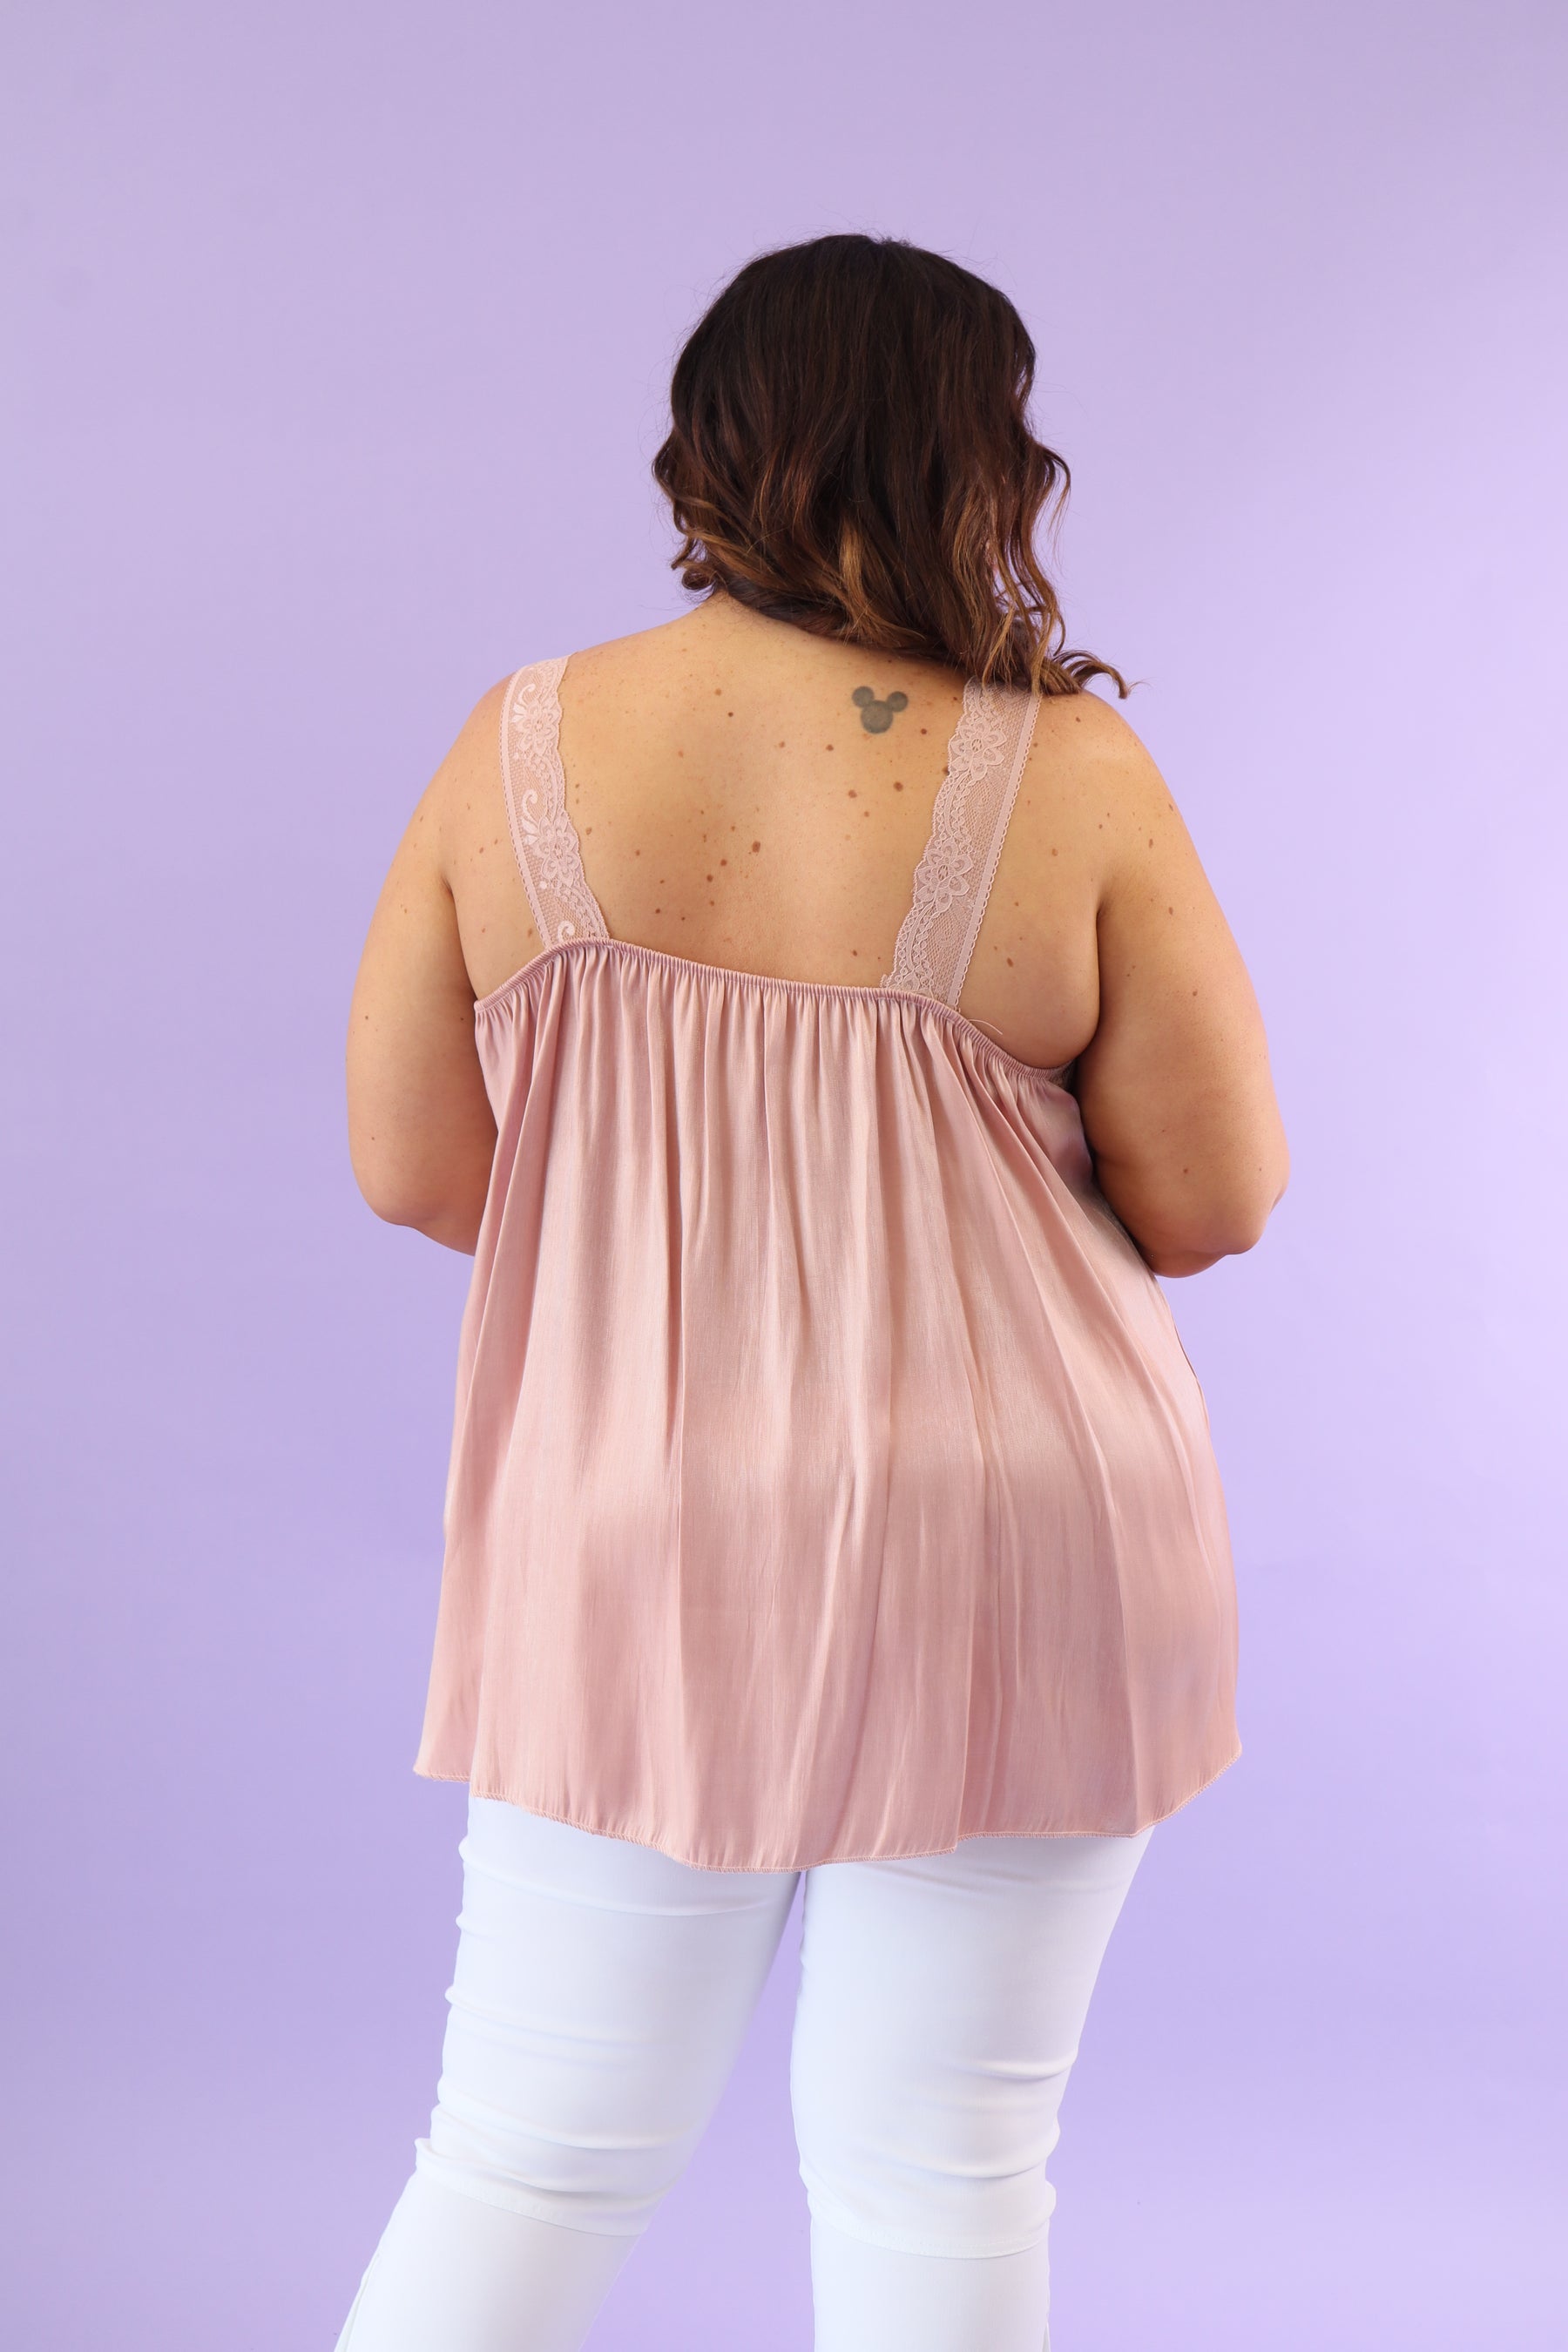 Lola Lace Trim Shimmer Vest in Dusty Pink